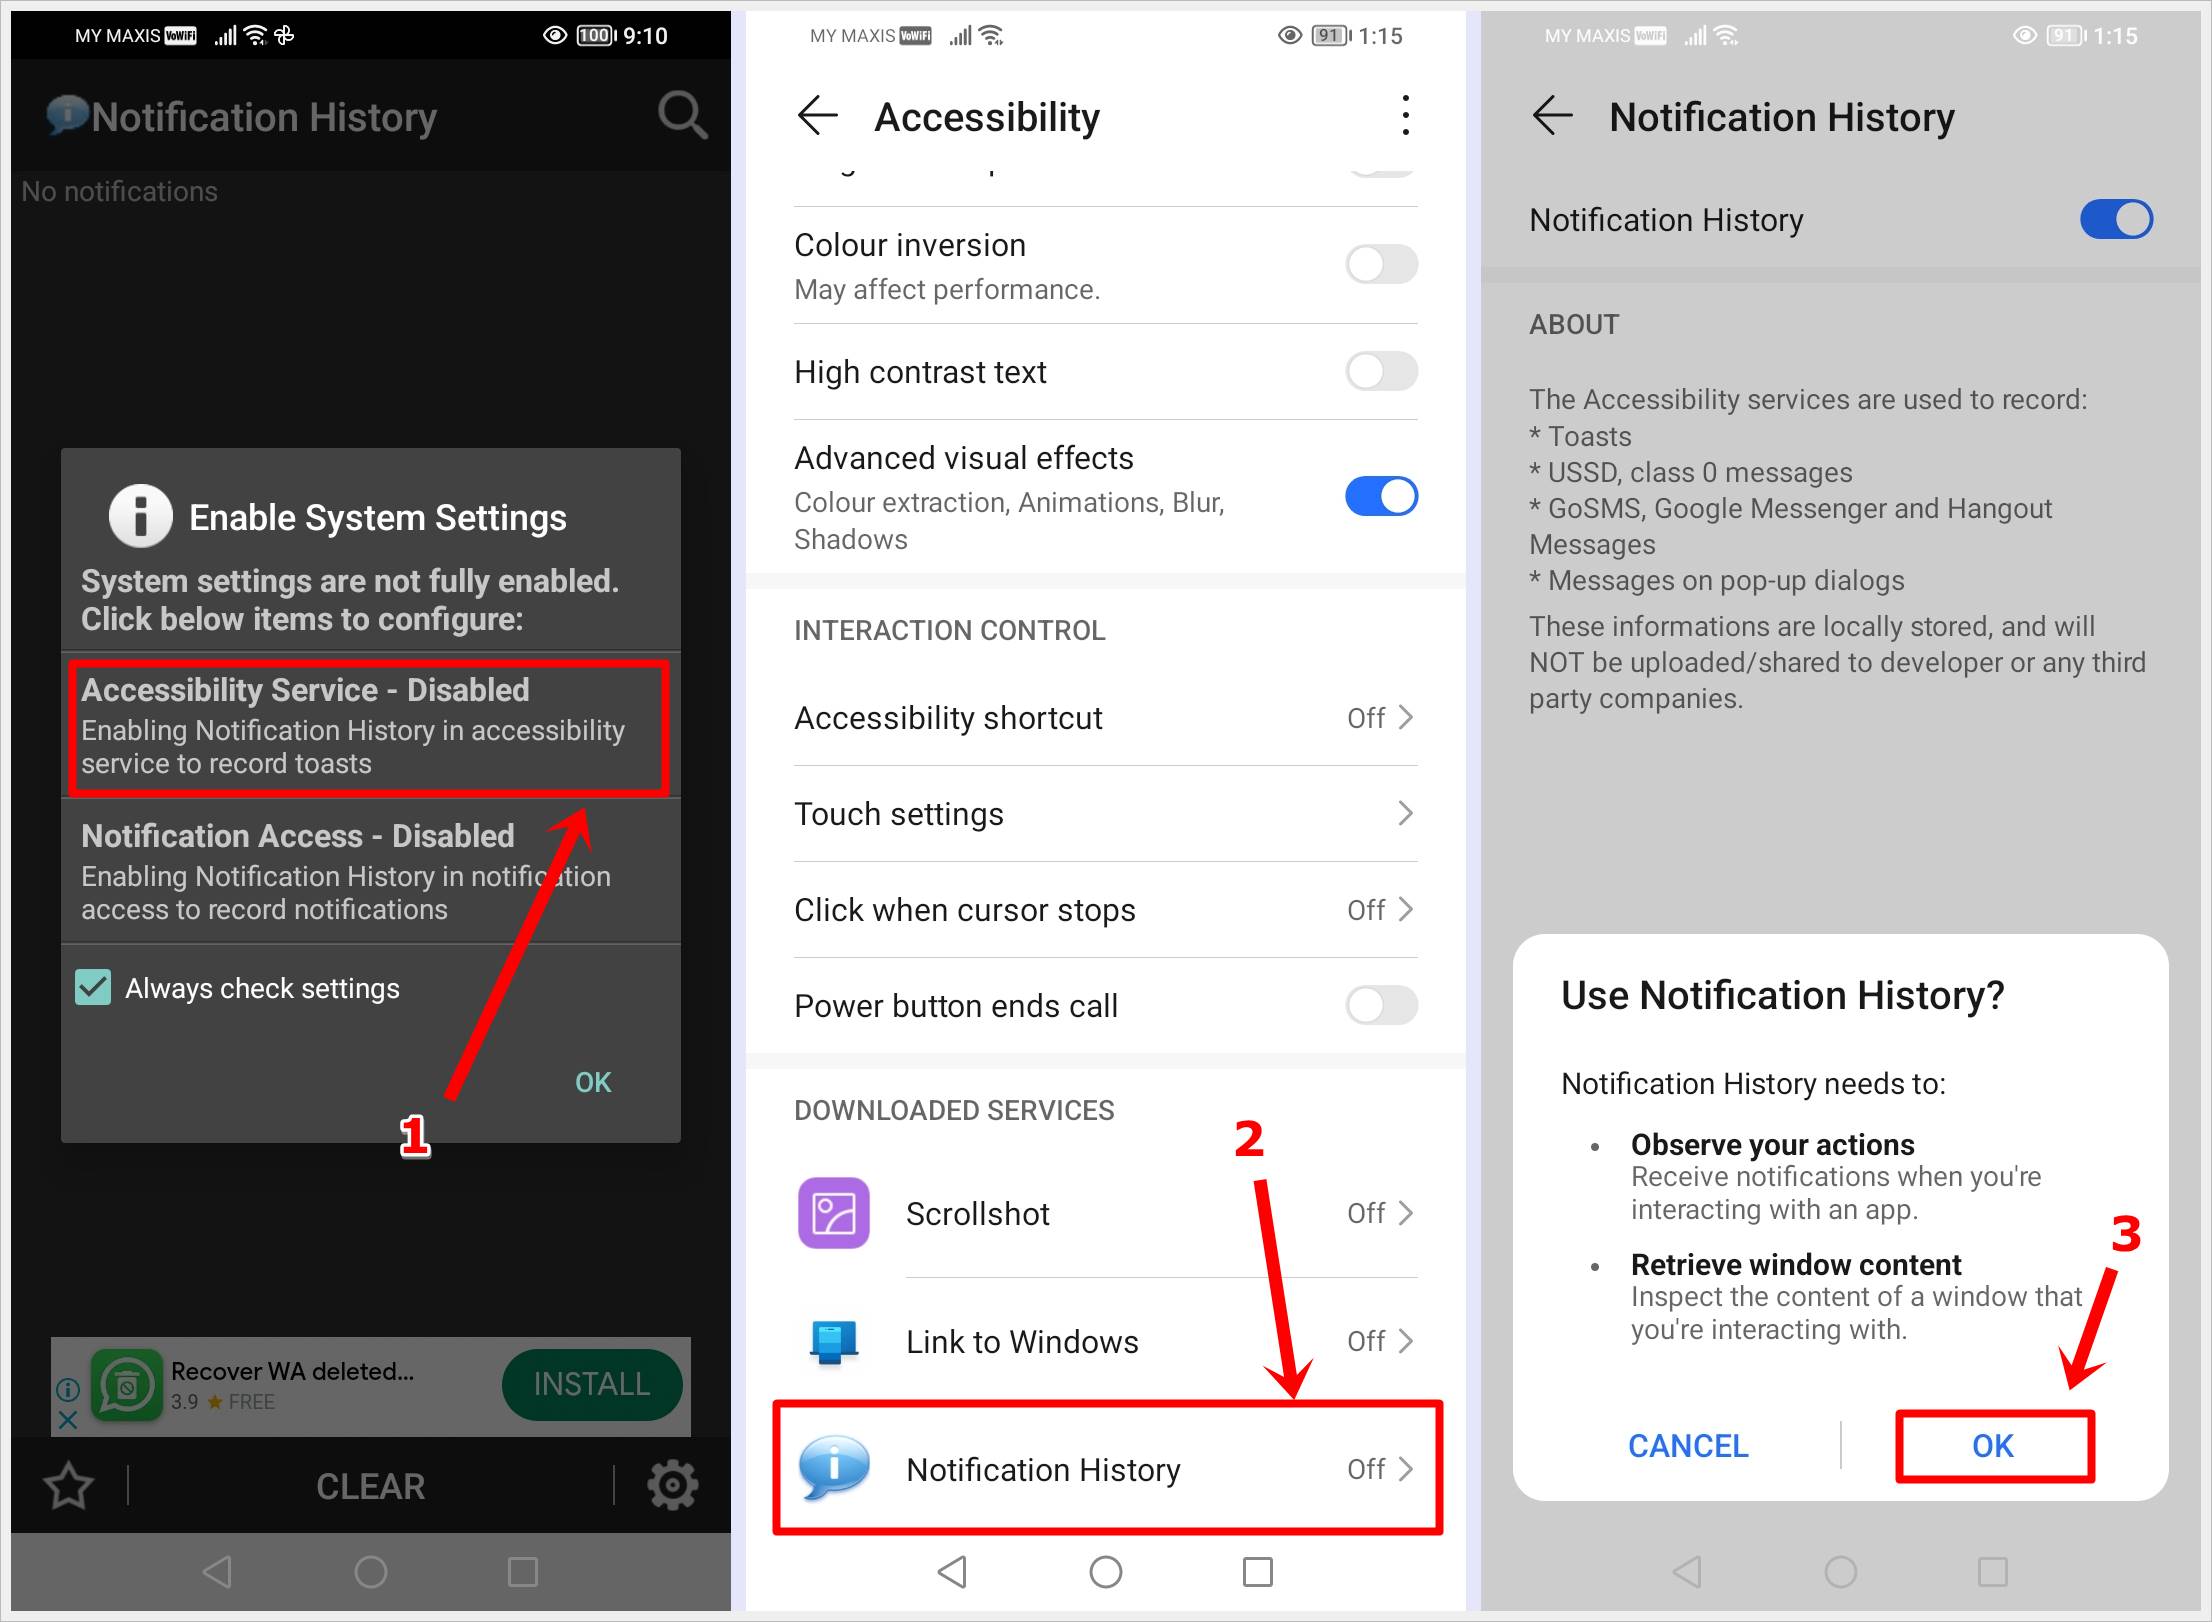 This image shows three screenshots of the step-by-step guide to enable 'Notification History' in 'Accessibility Service' on an Android phone.